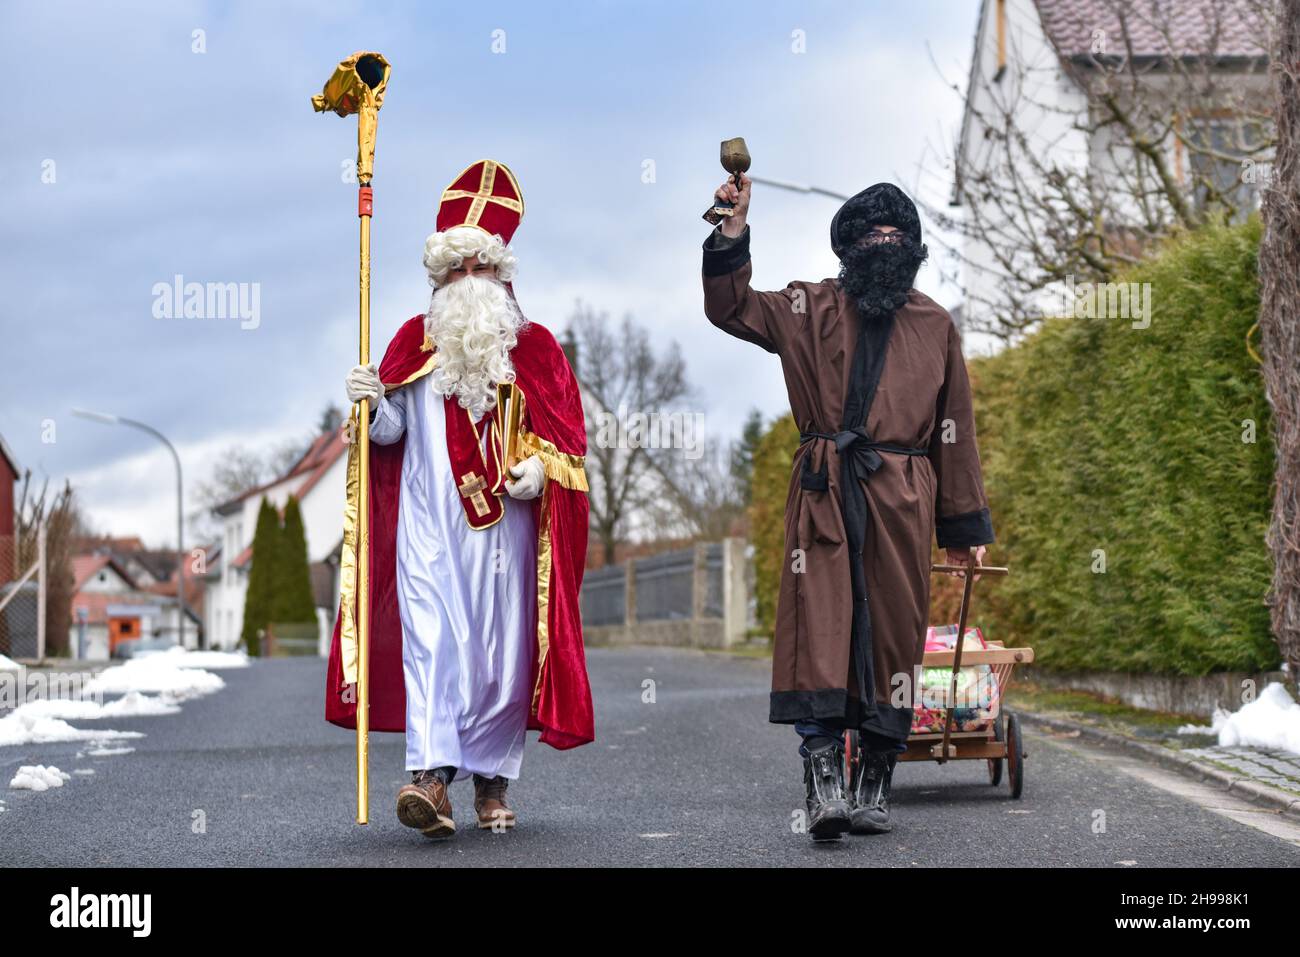 Germany ,Kirchlauter,  - 05 Dec 2021 - Local News - St. Nikolaus fundraiser for Franken Hospice Bamberg    Image: Markus Geier (Nikolaus) and Jan Schneiderbanger (Knecht Ruprecht) walk around the town of Kirchlauter, dressed as the Christmas pair, delivering goodies to children along a registered route. Those taking part donate money, 100% of the money is sent to a youth hospice in Bamberg, Germany. Stock Photo